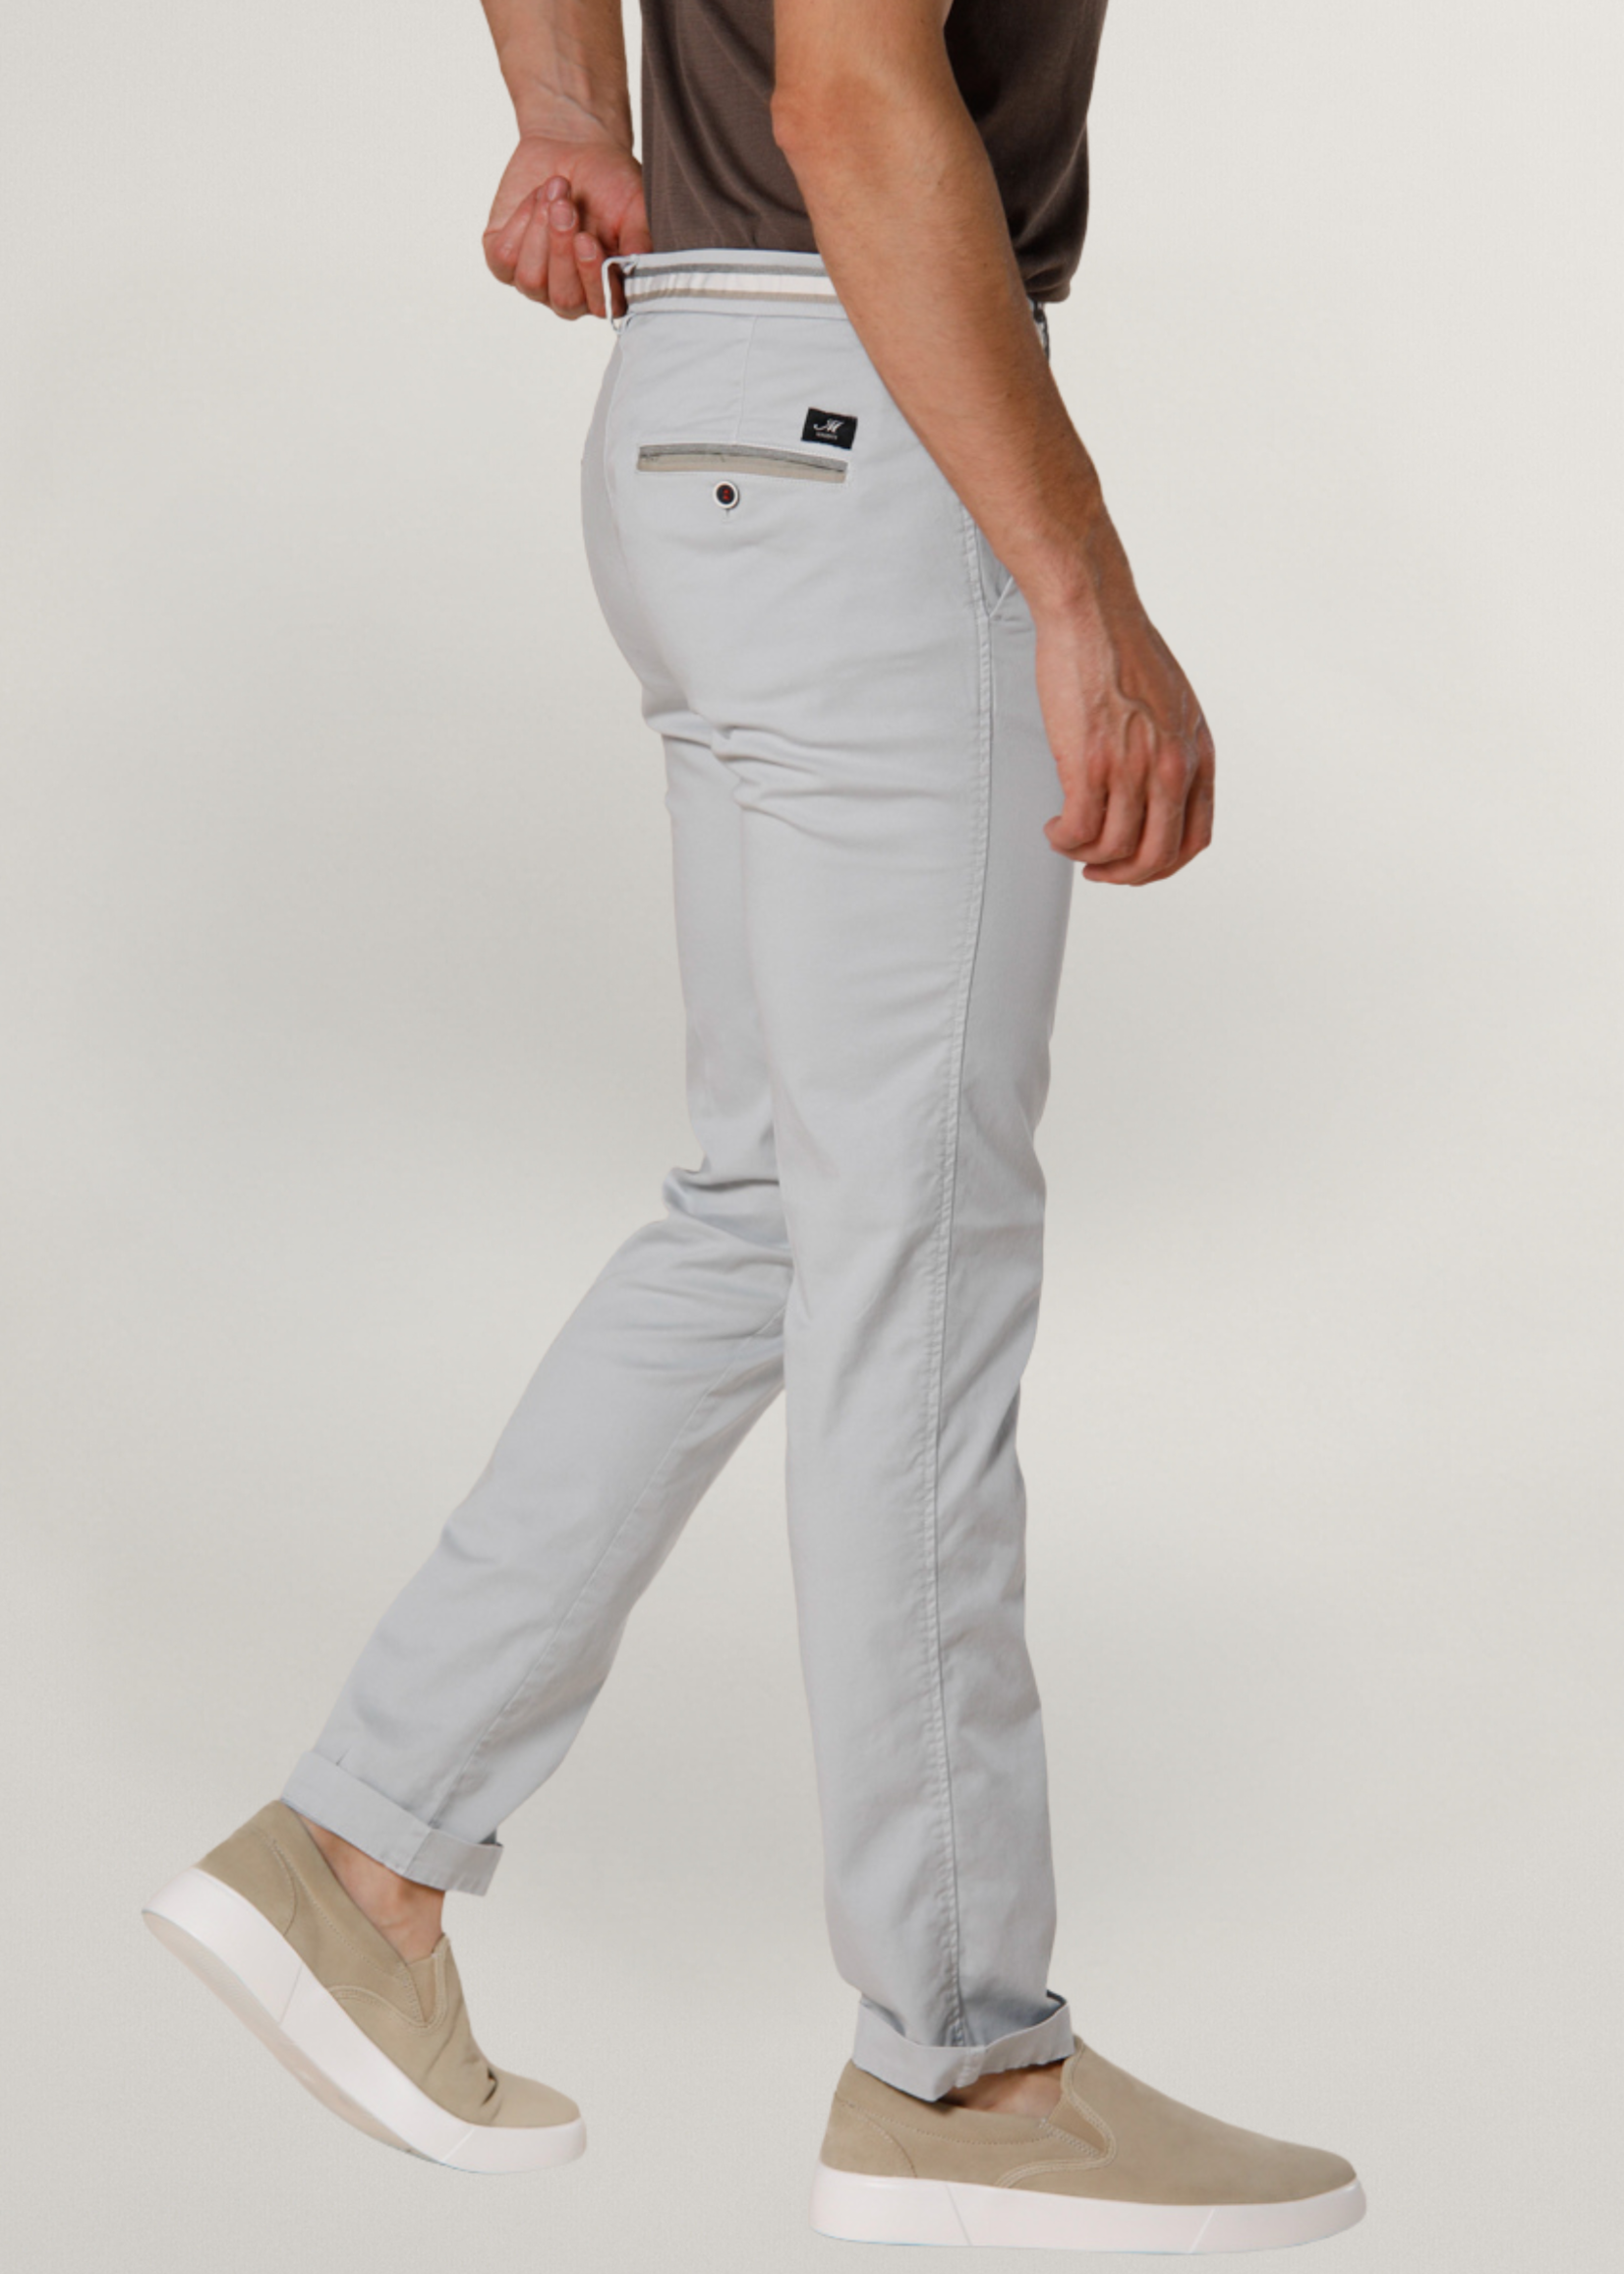 MASON'S Torino Summer men's chino pants in cotton and tencel with ribbons slim - Light Grey